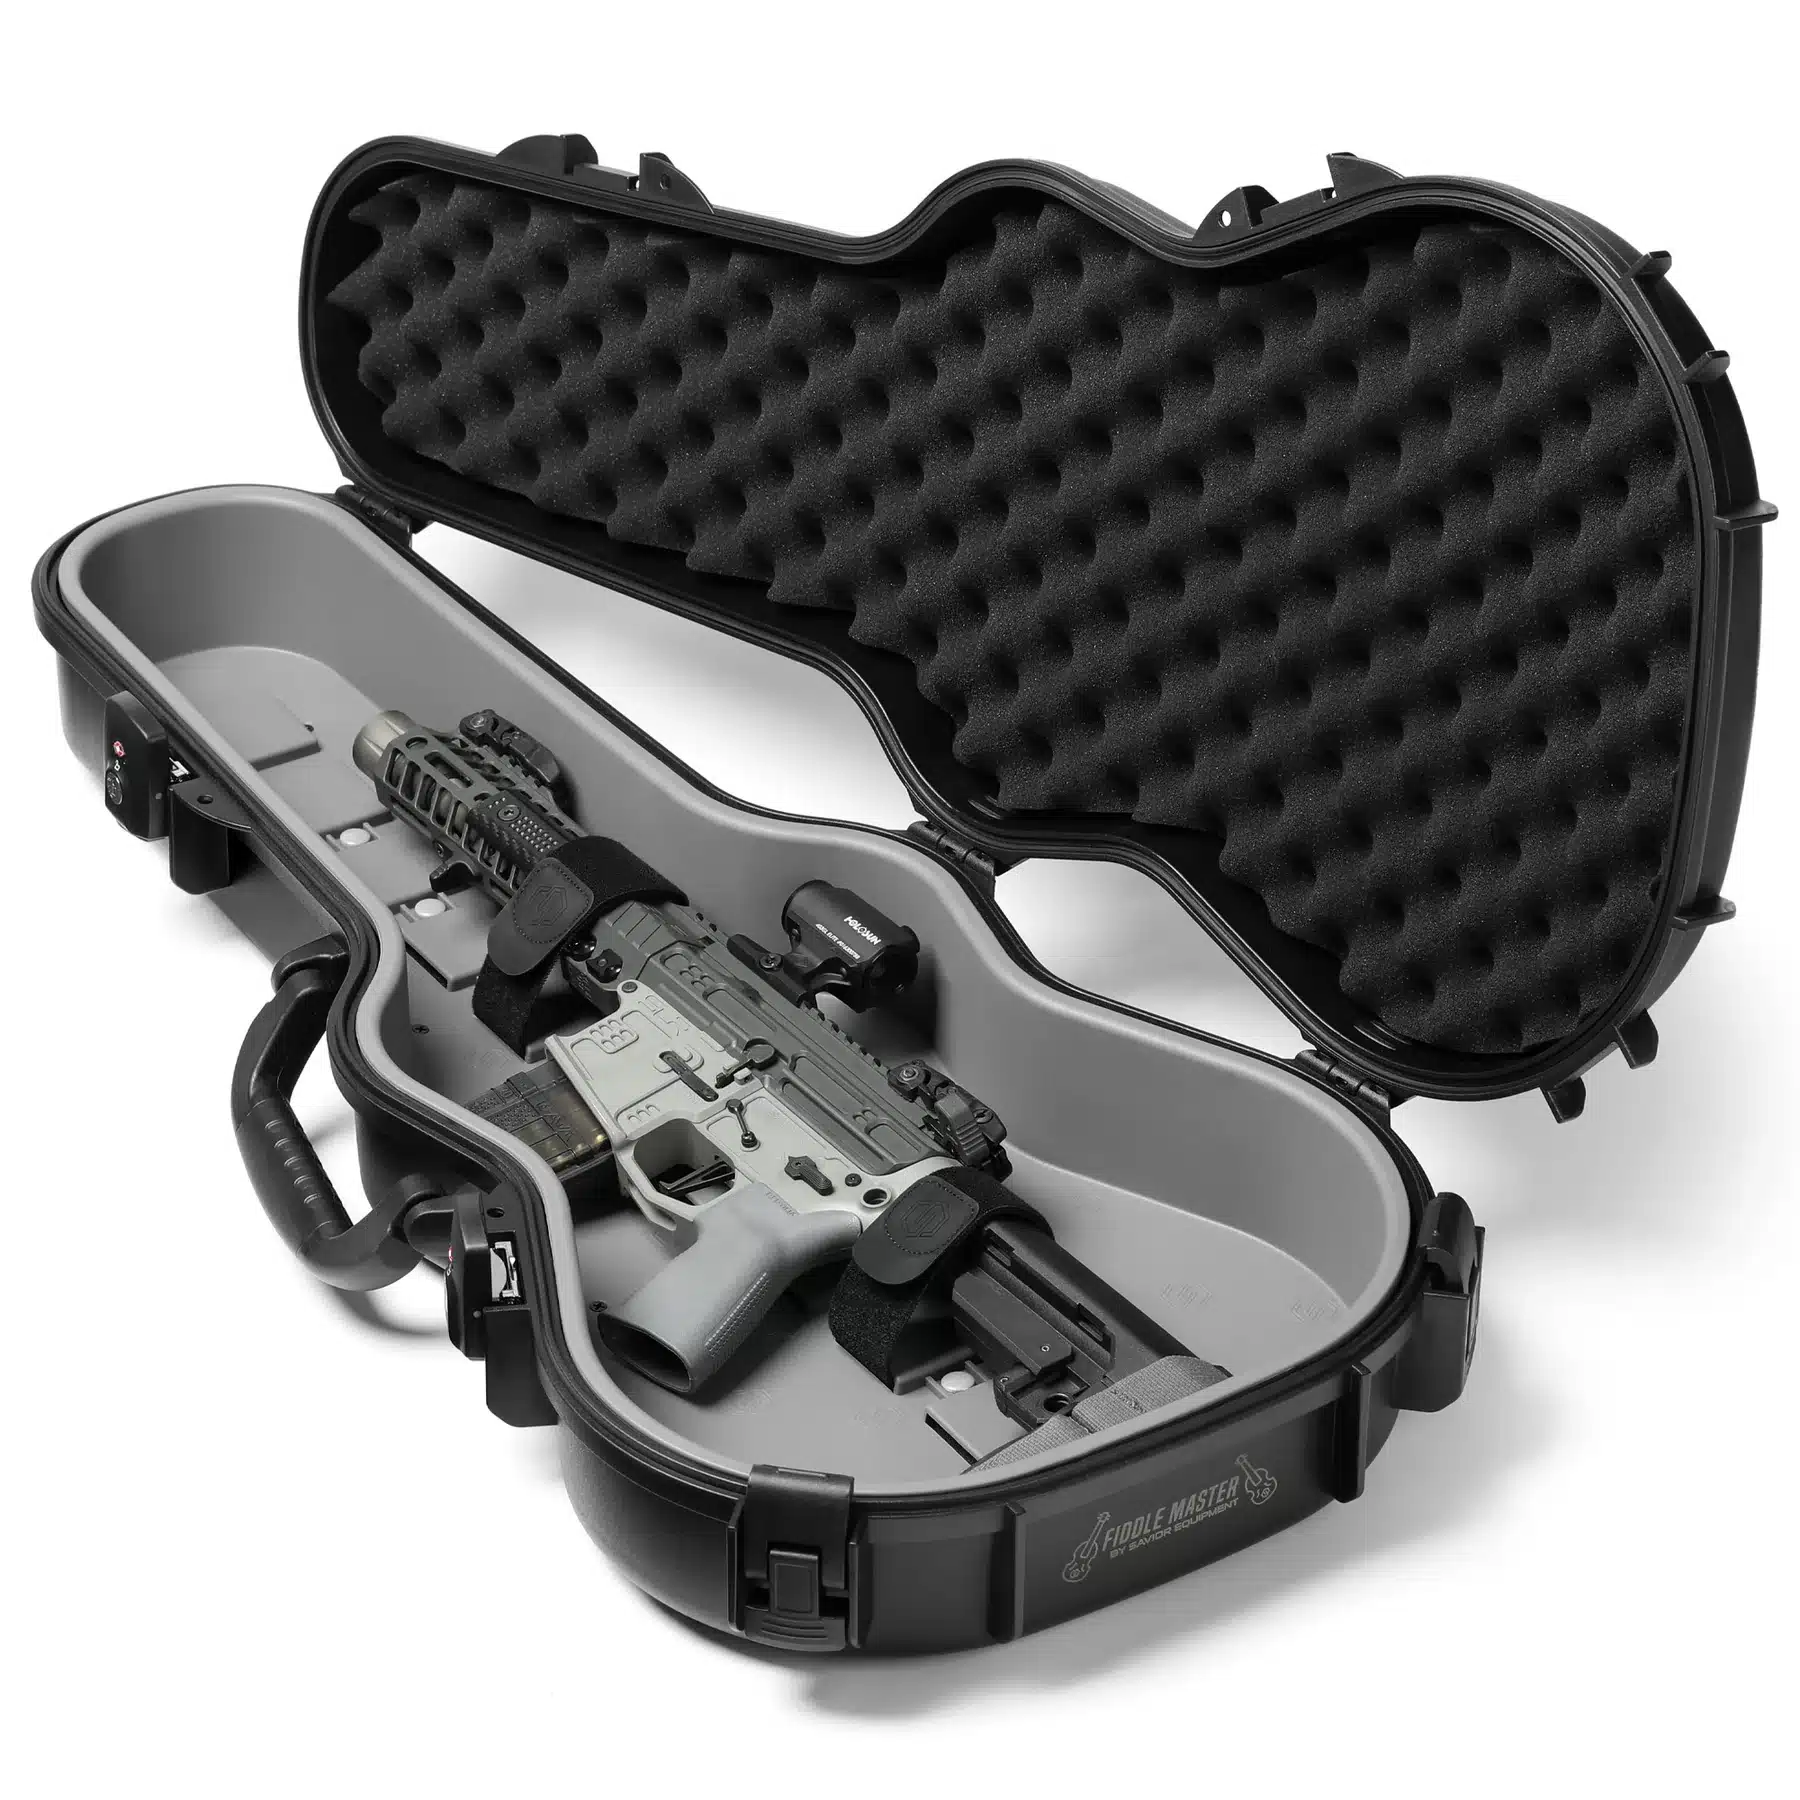 https://cityarsenal.com/product/savior-equipment-fiddle-master-30-discreet-violin-case-built-in-synthetic-rubber-molle-system-tsa-locks-and-keys-and-2x-tie-down-strap-rc-violin-bk/